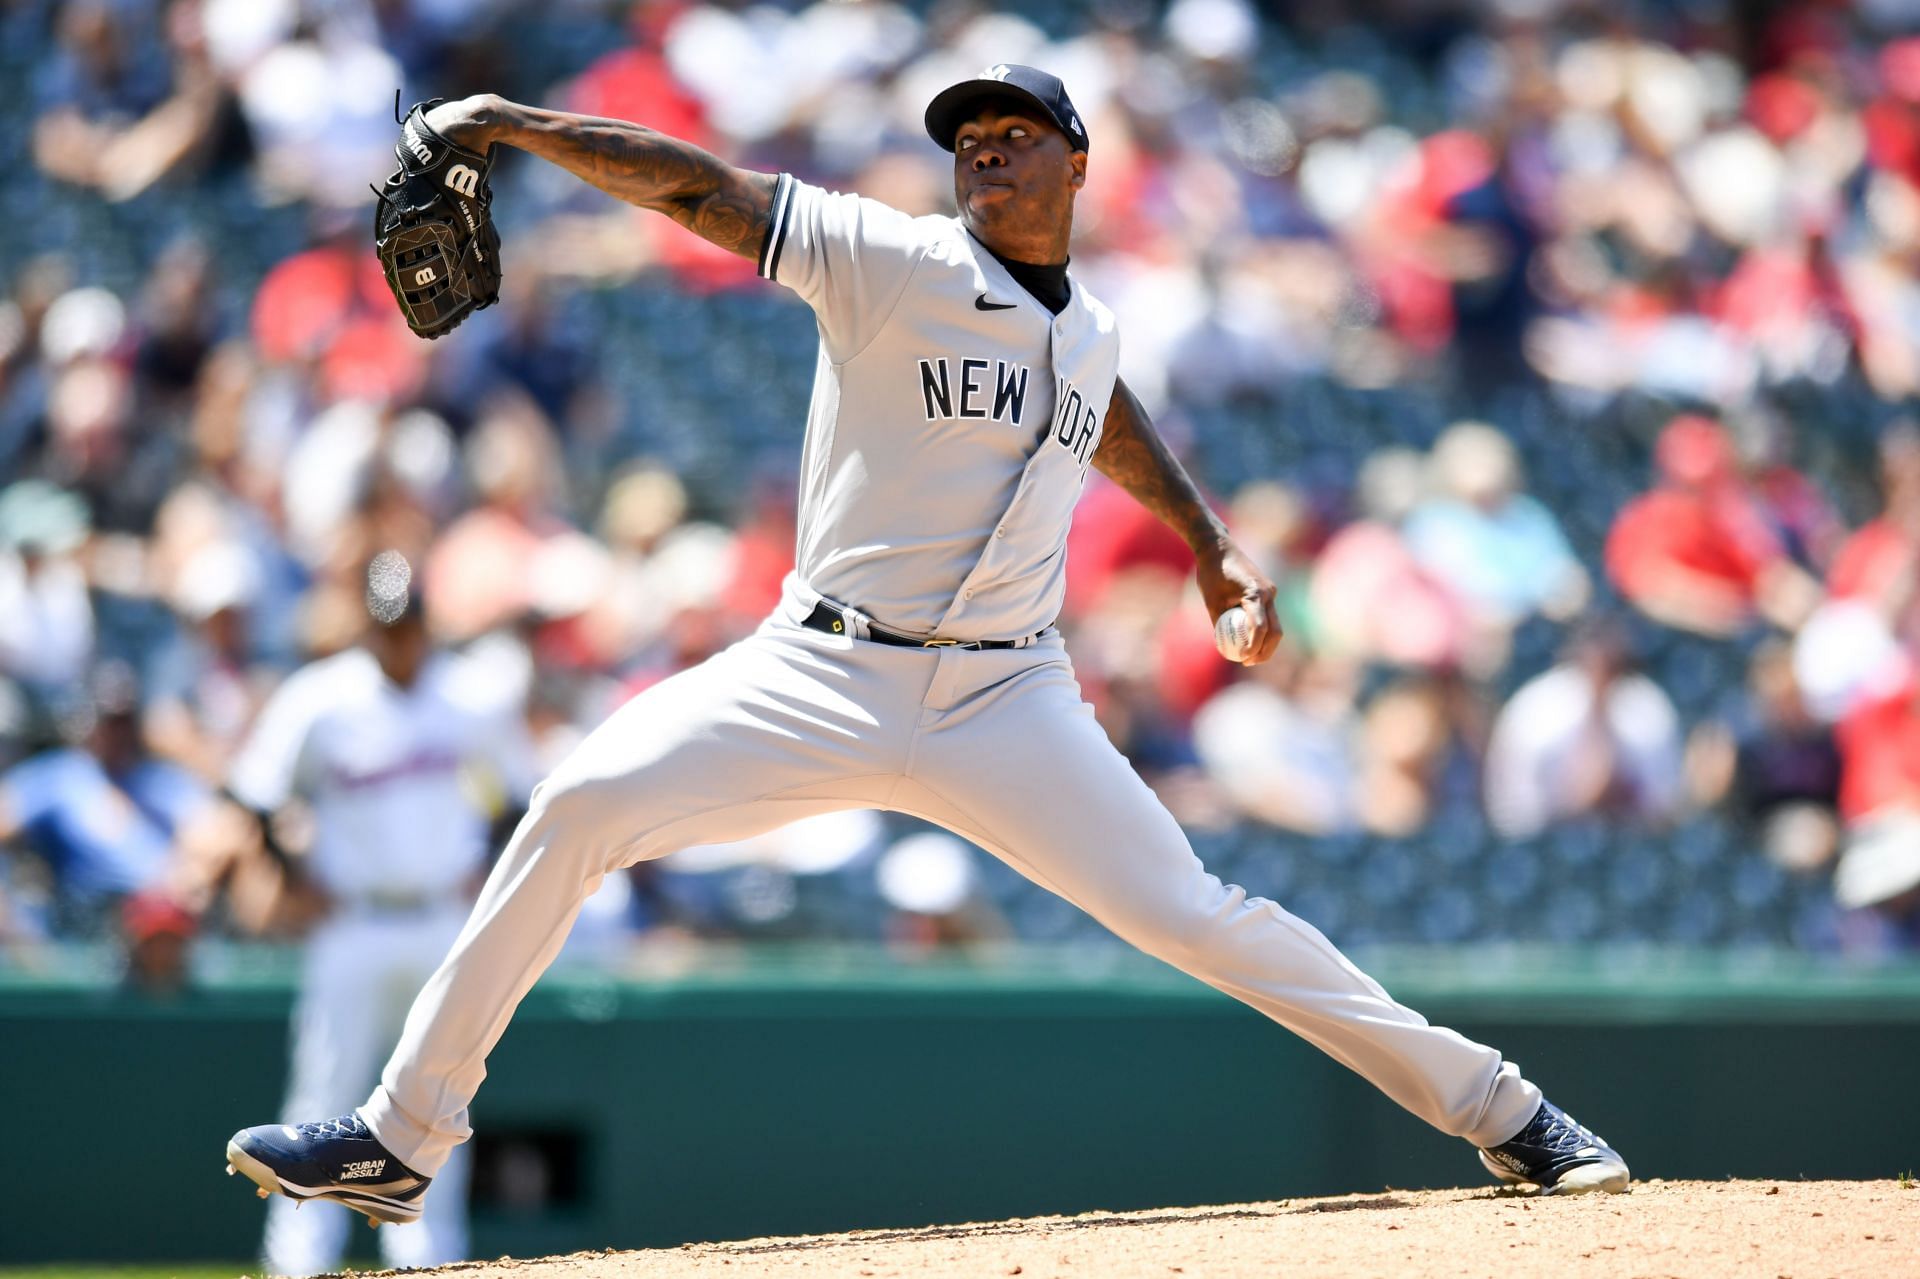 Aroldis Chapman Left off Yankees' Playoff Roster After Missing